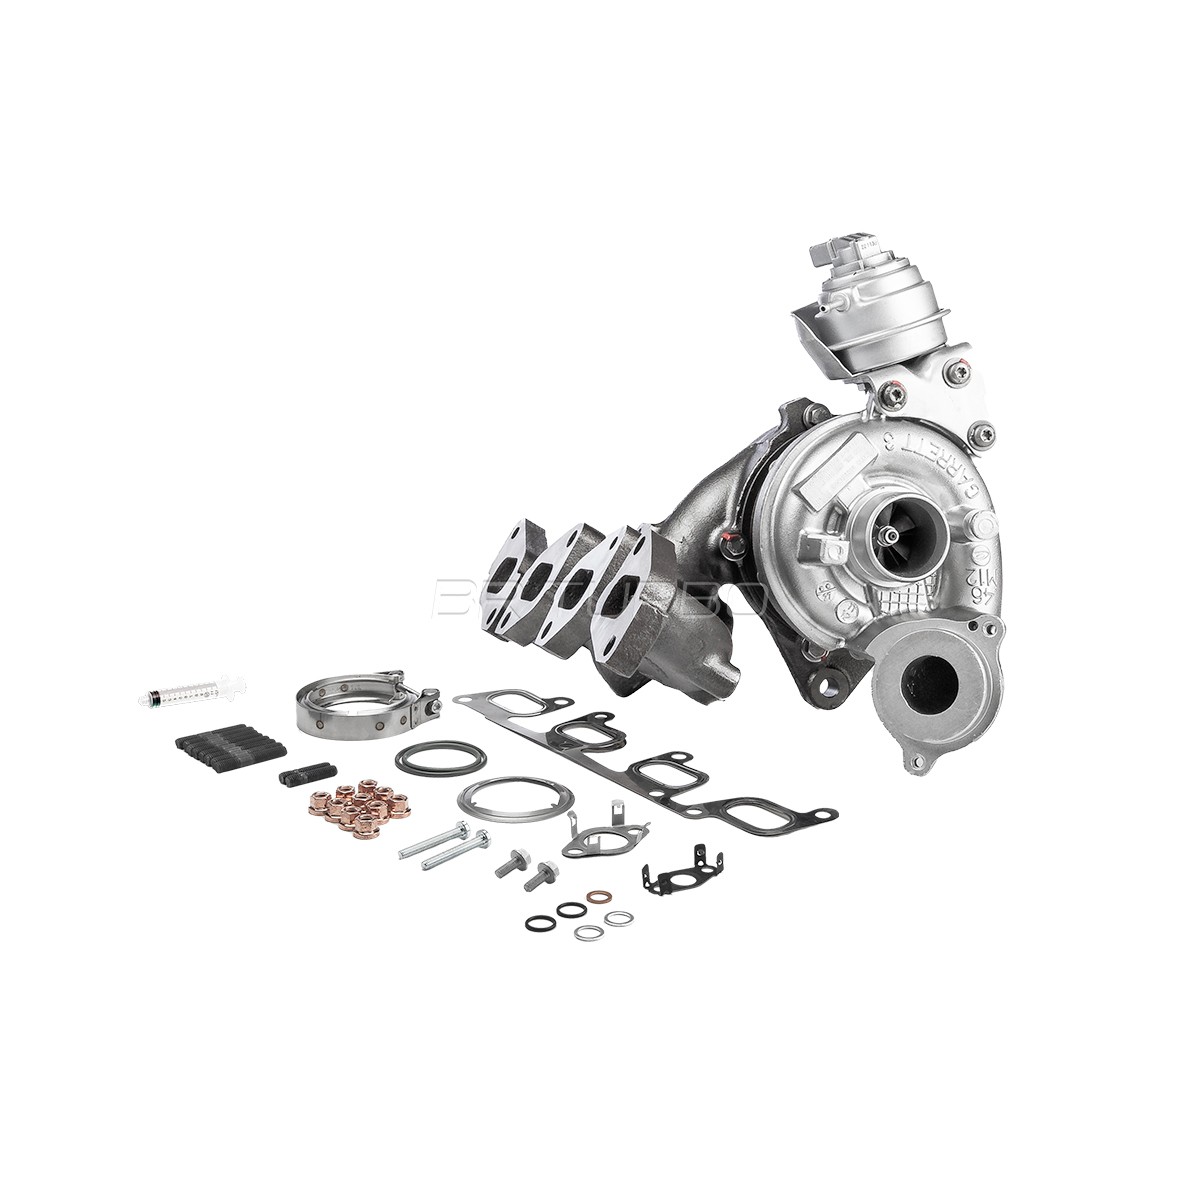 7854485001RSM Turbocharger REMANUFACTURED TURBOCHARGER WITH MOUNTING KIT BR Turbo 785448-5001RSM review and test